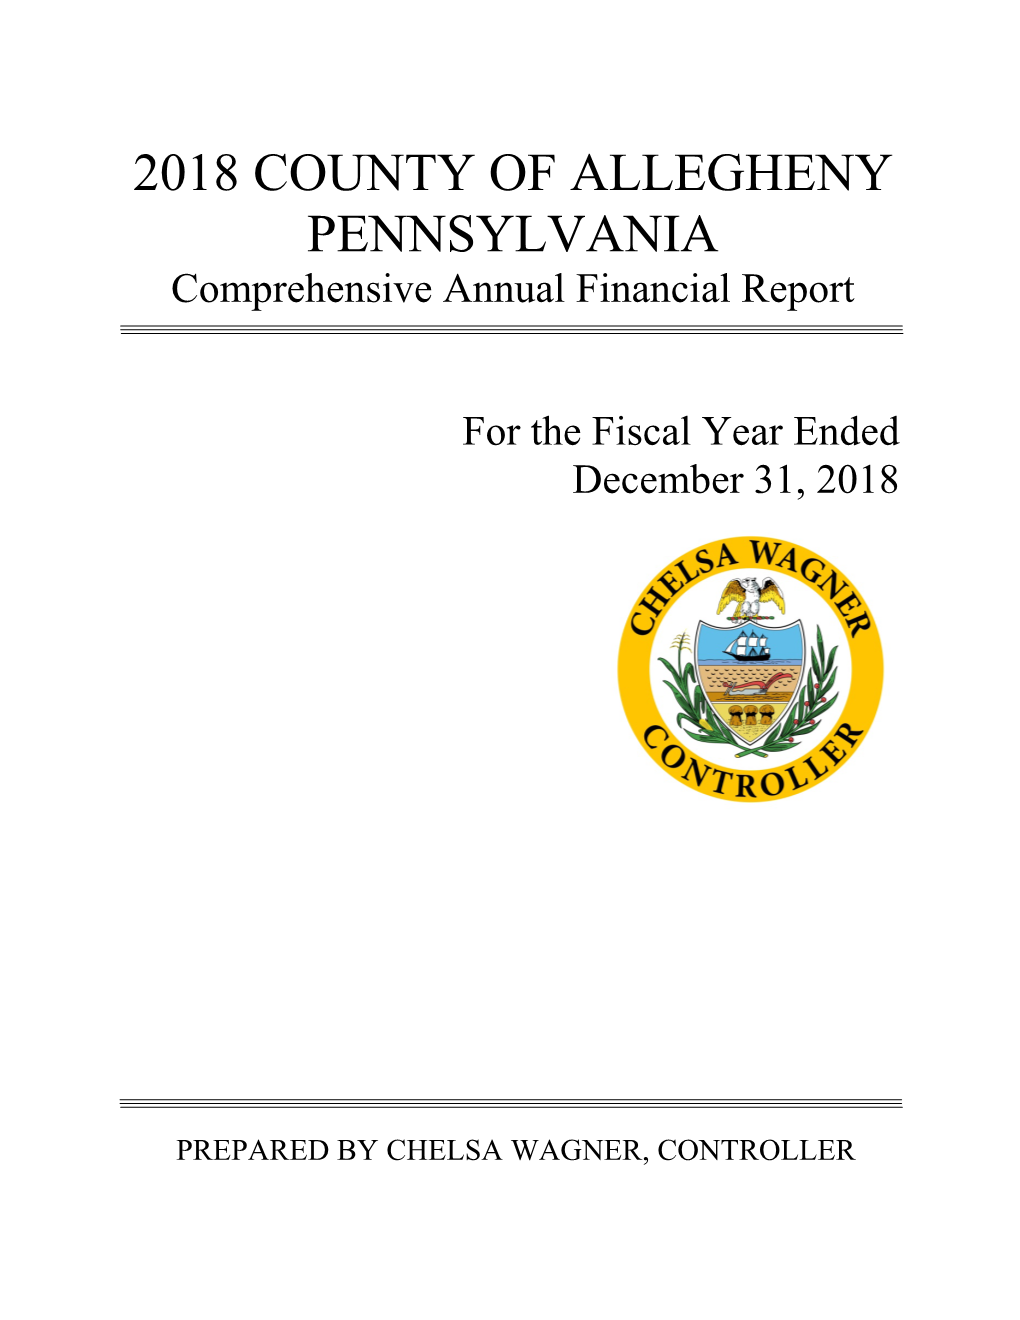 2018 County of Allegheny Comprehensive Annual Financial Report